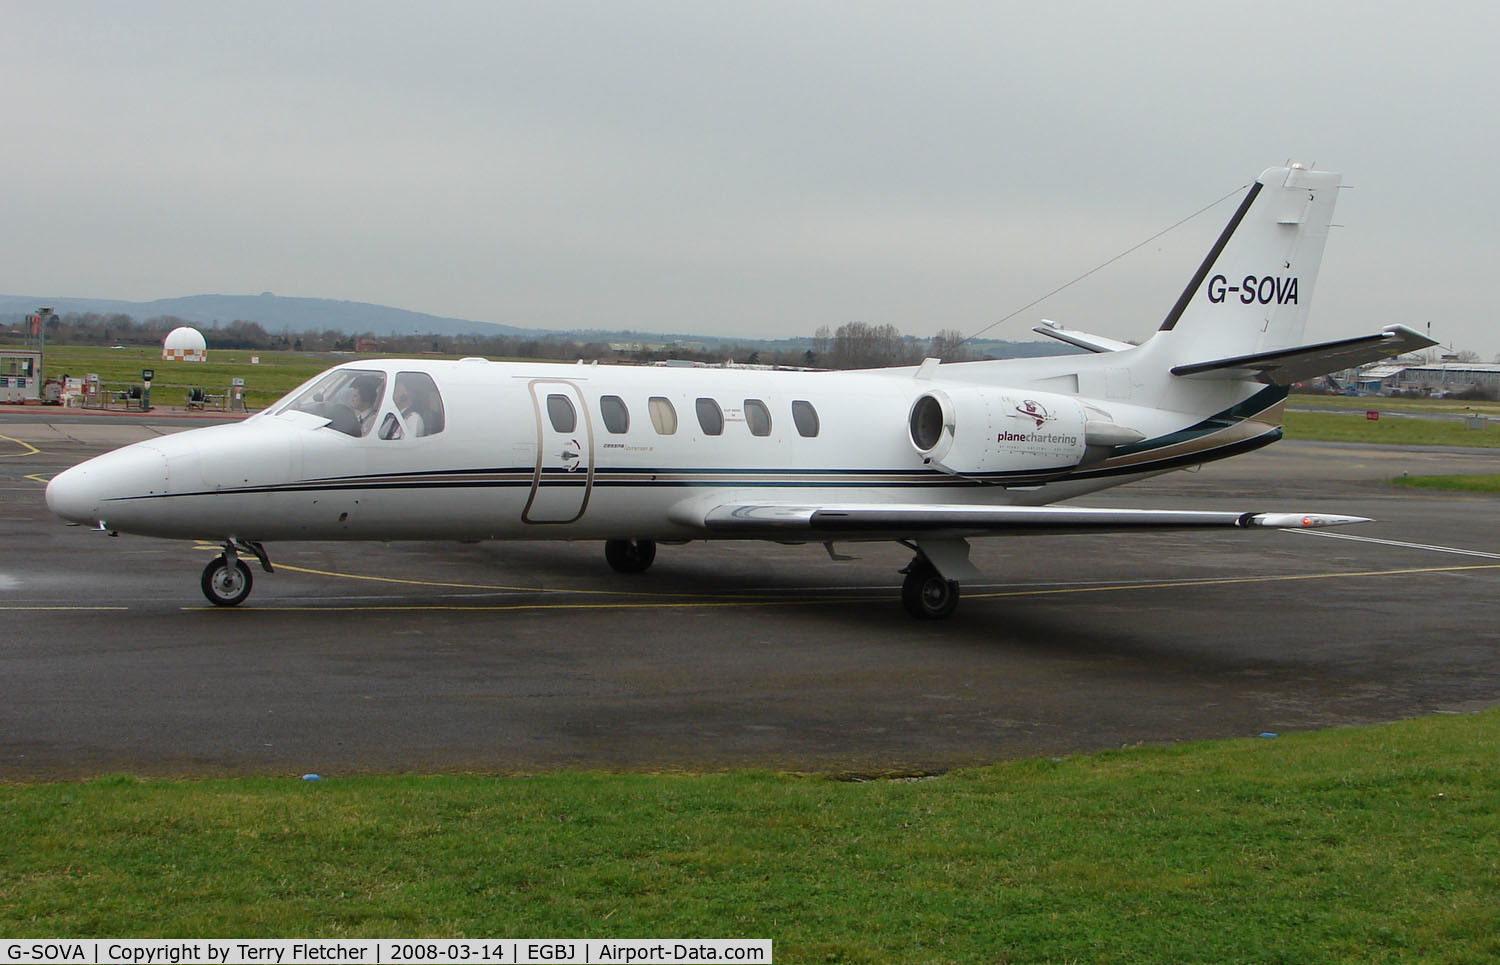 G-SOVA, 1990 Cessna 550 Citation II C/N 550-0649, A visitor to Gloucestershire Airport on the day of the horse racing Gold Cup  at the nearby Cheltenham Racecourse